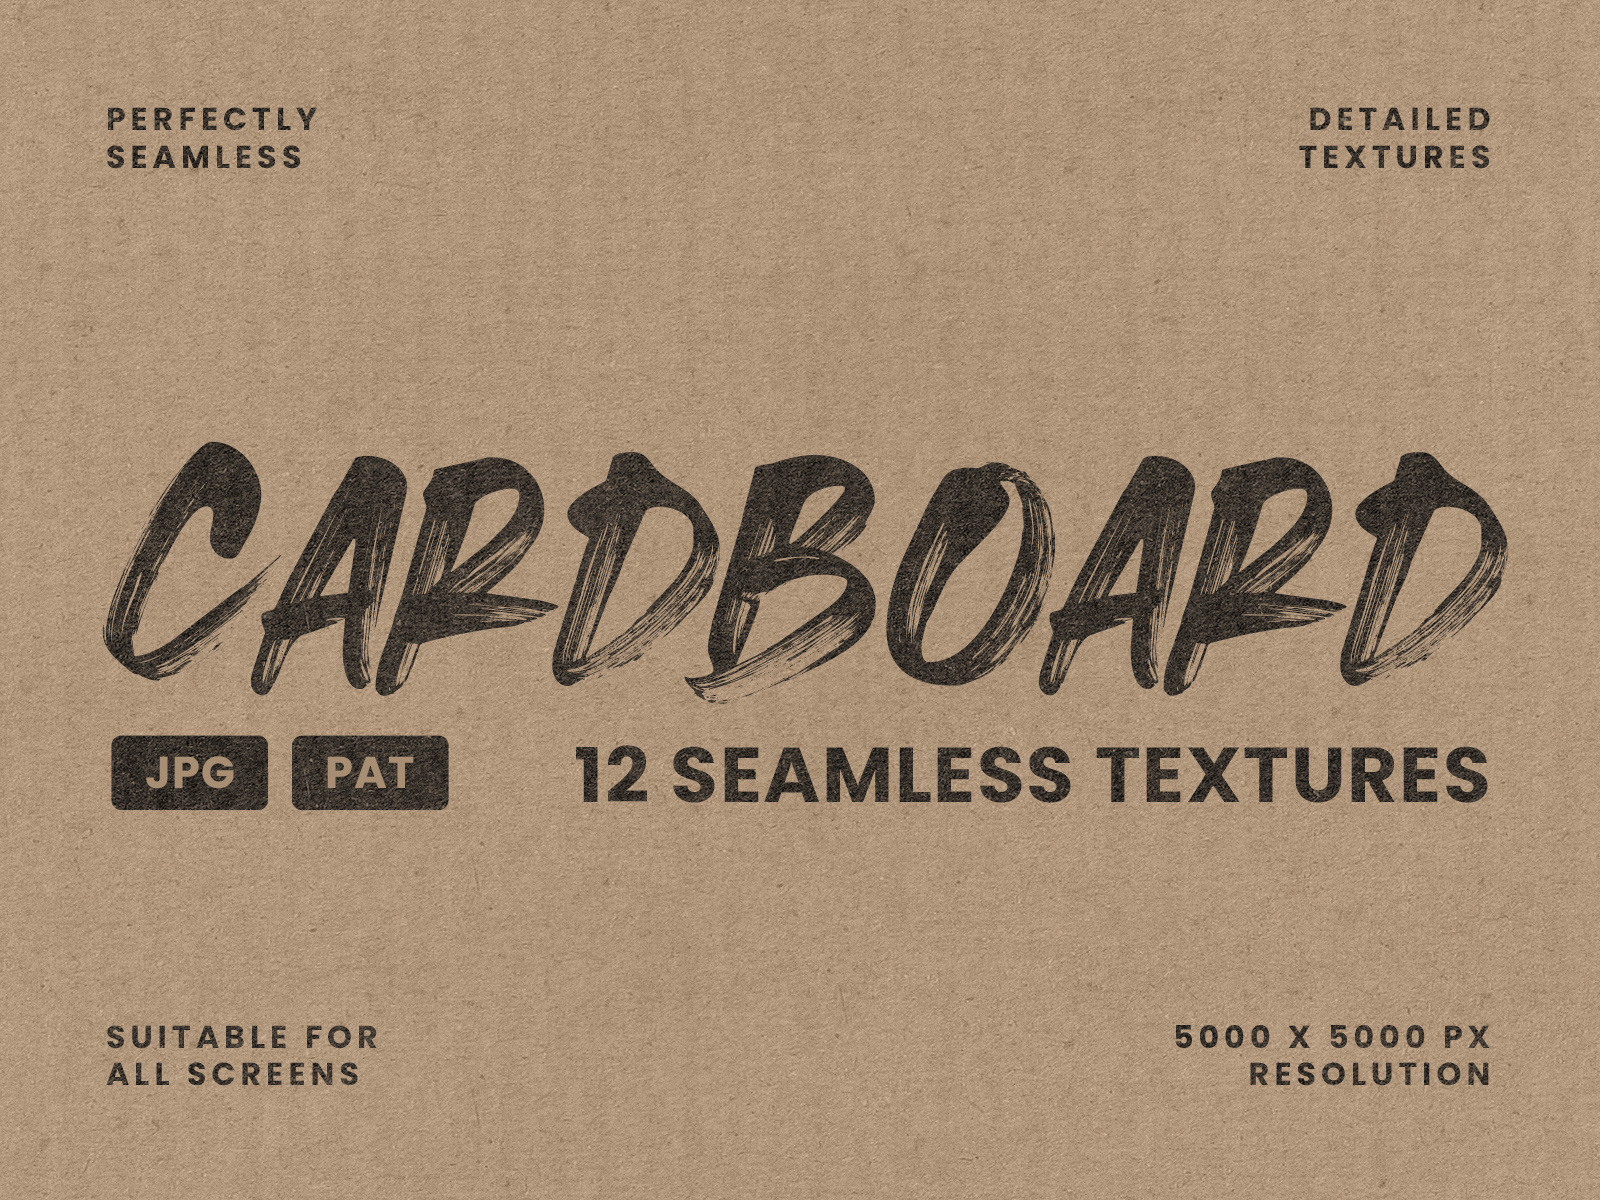 Seamless Cardboard Textures by Aurora Graphics on Dribbble